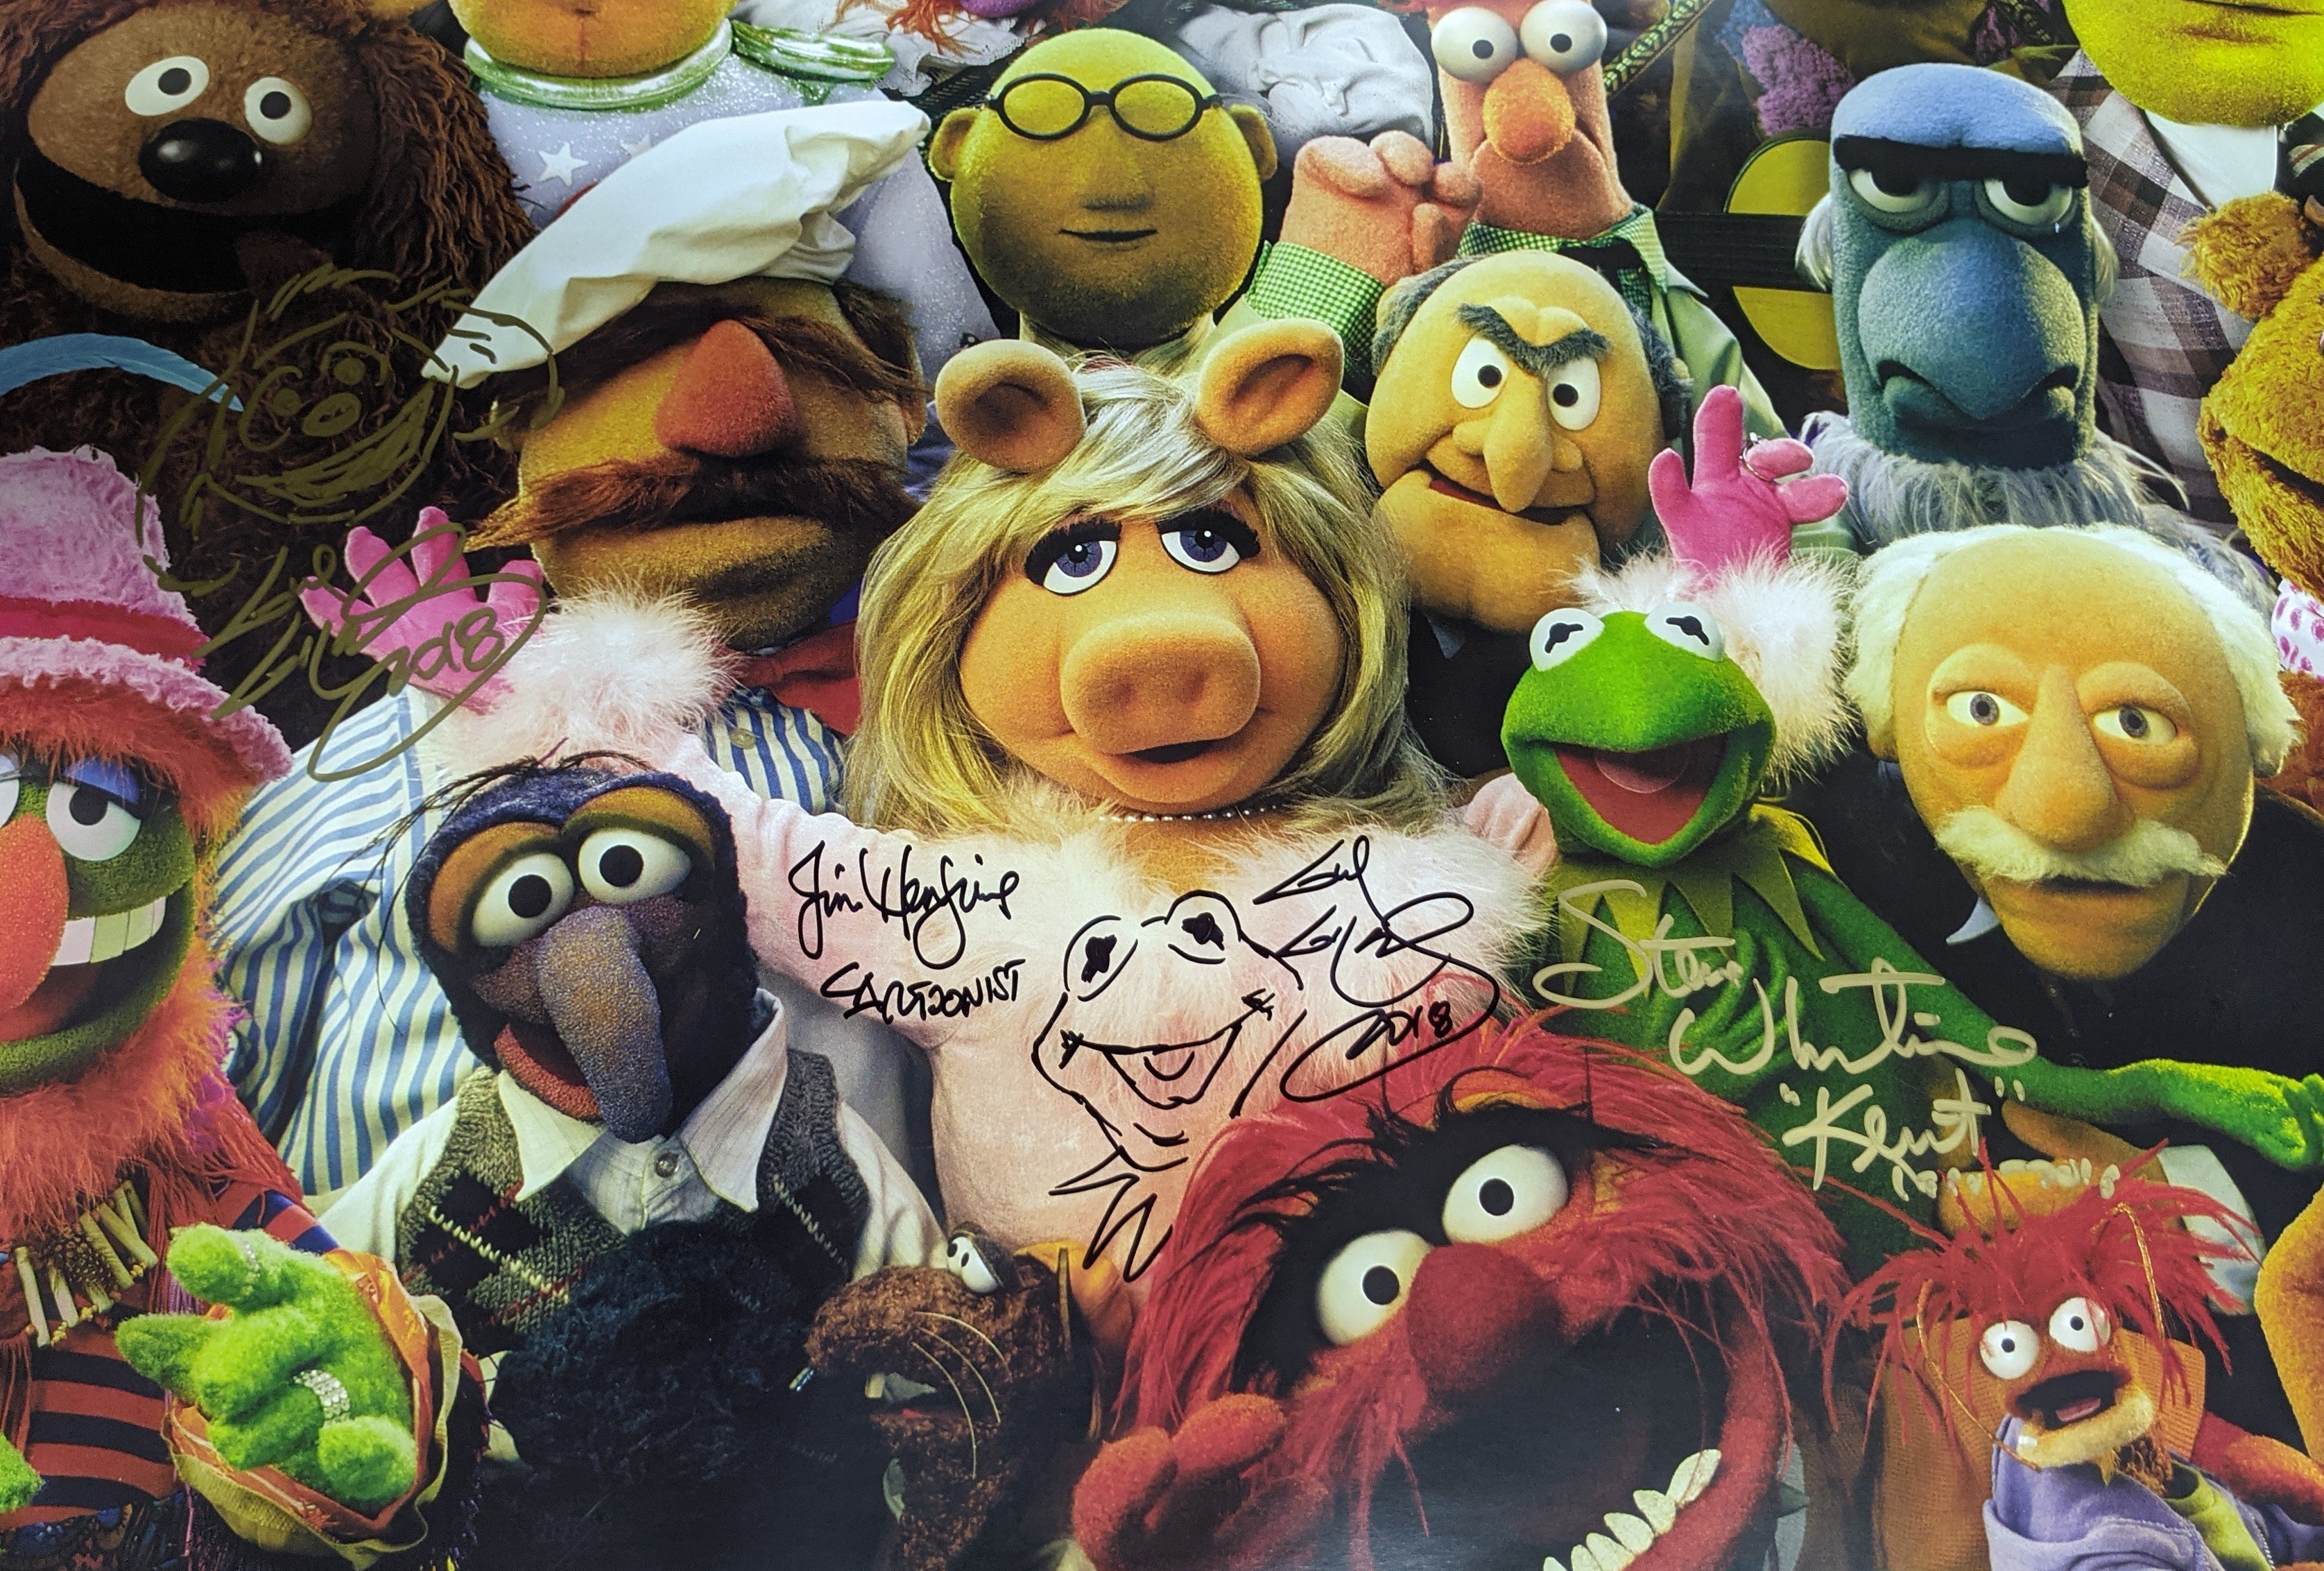 The Muppet Show 24x36 Poster Signed Autograph Whitmire Gilchrist JSA Certified COA Auto